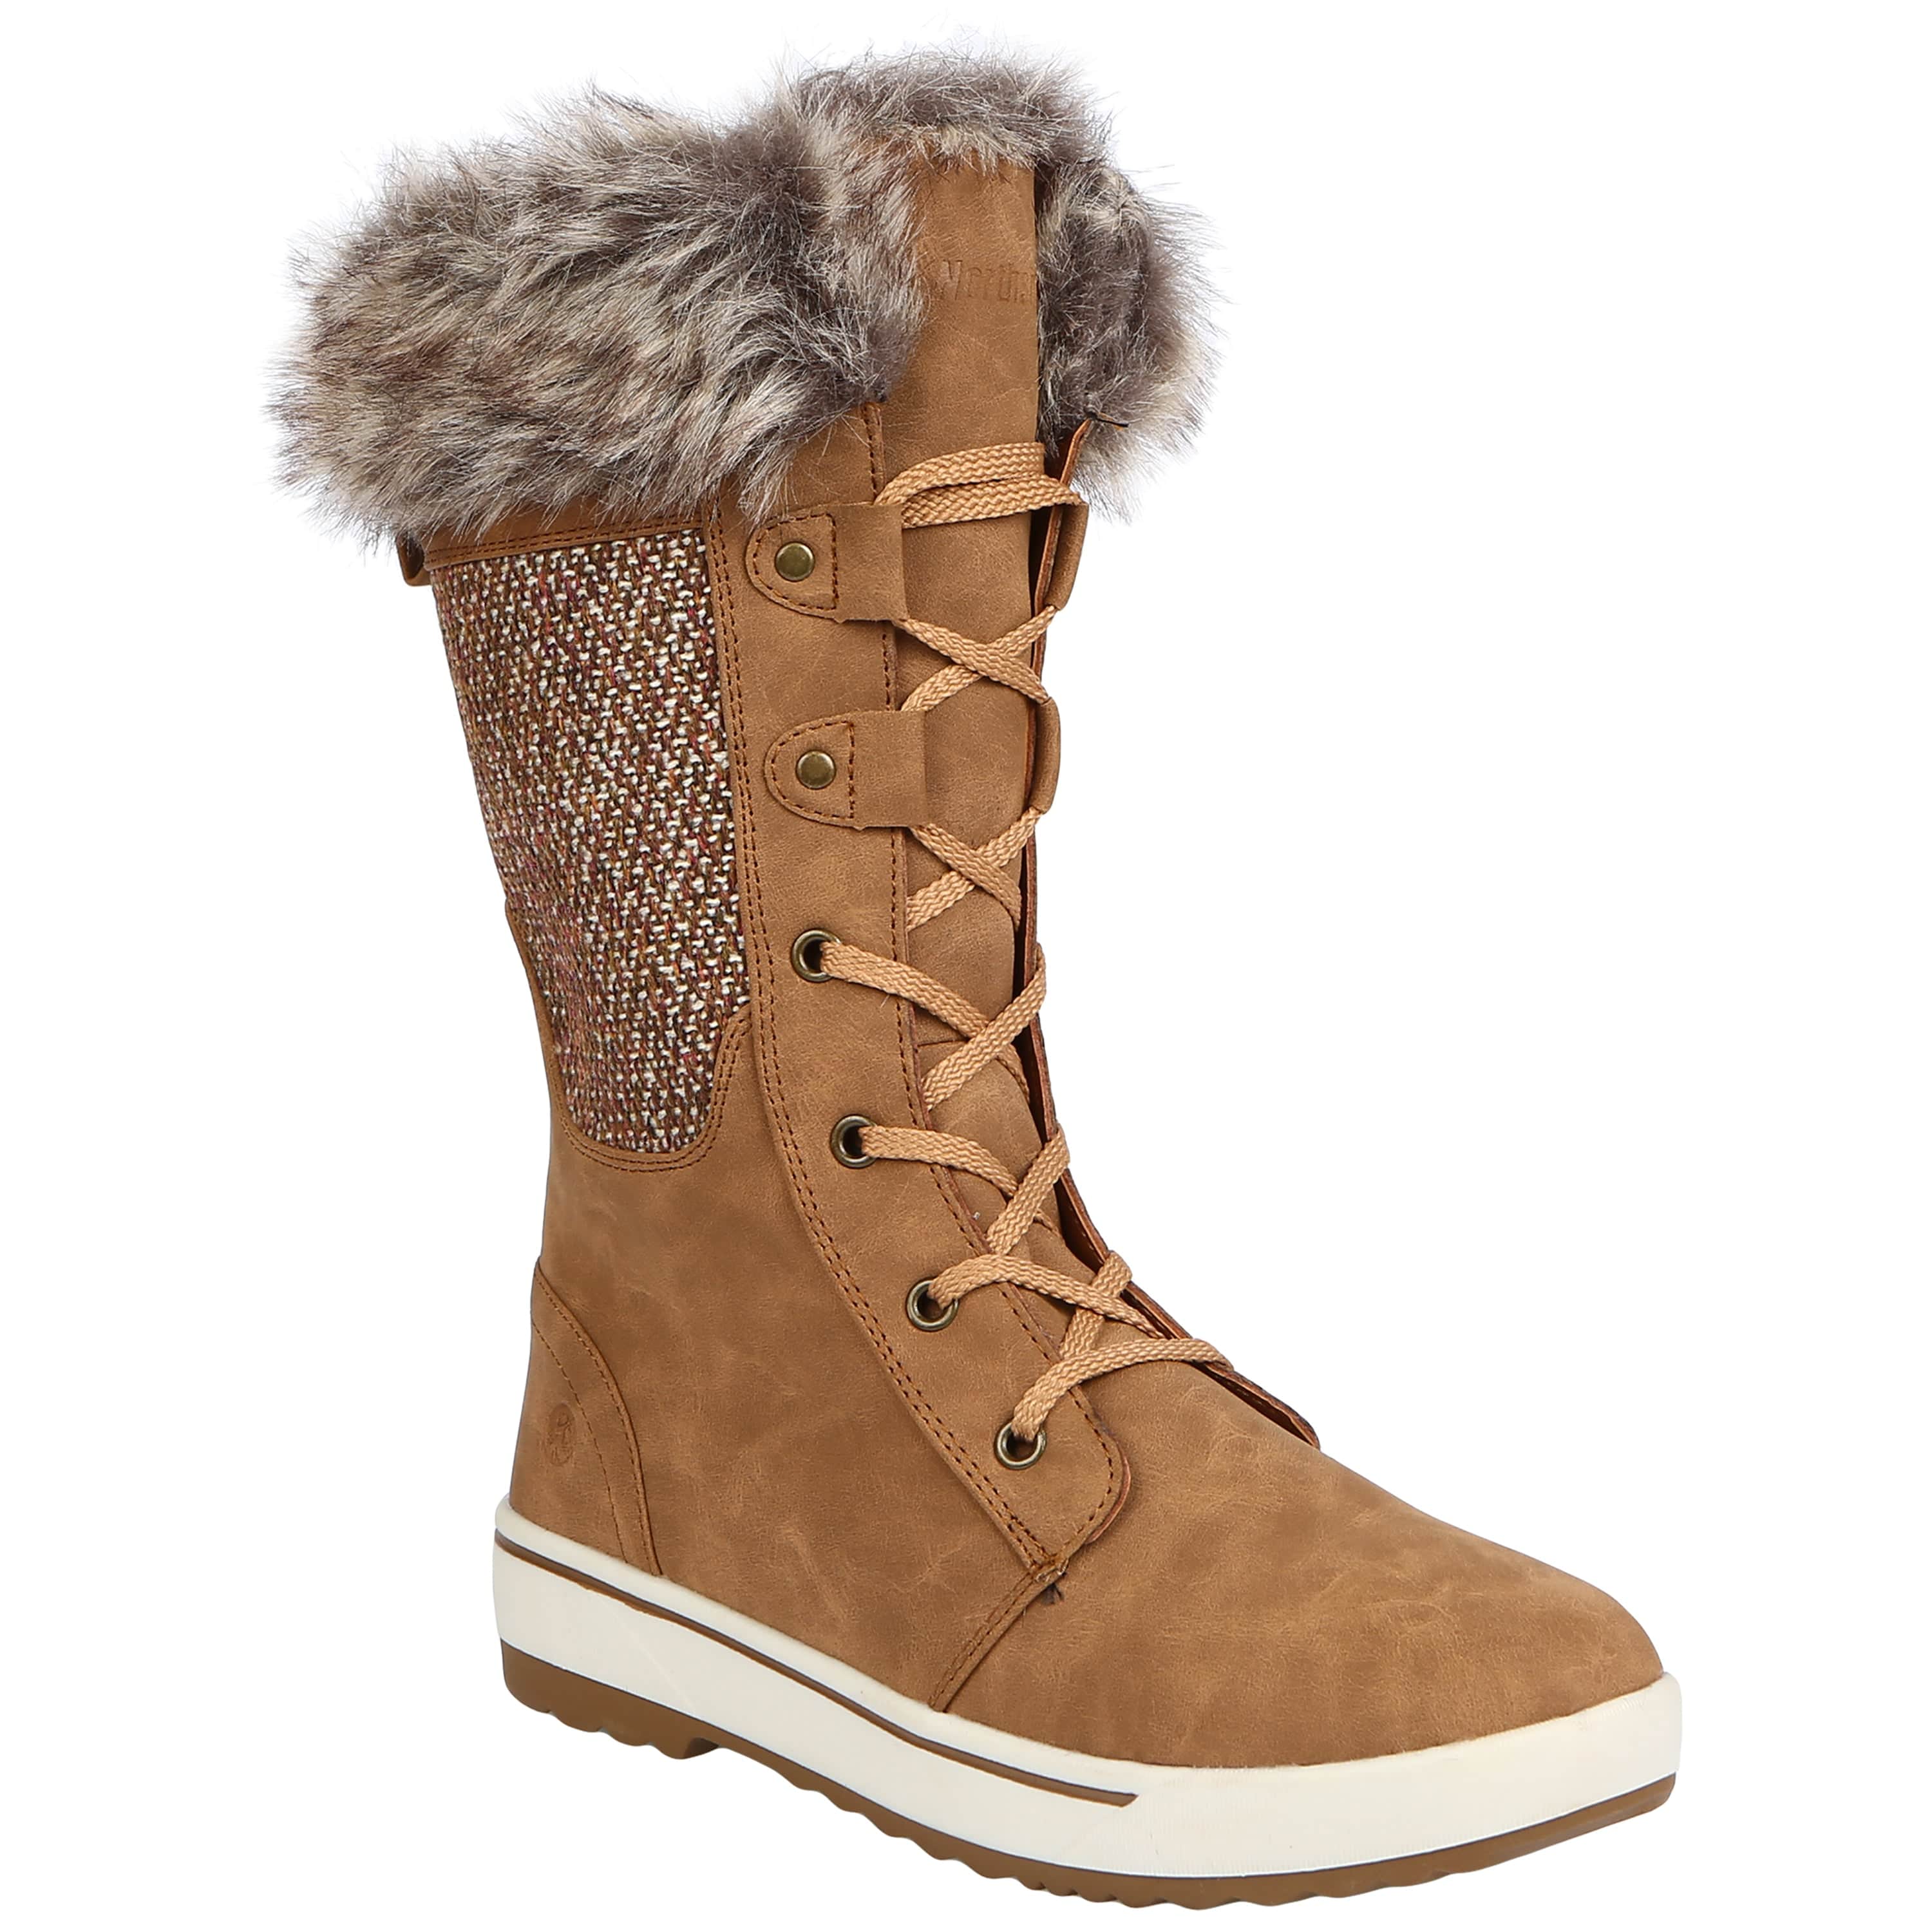 Lace up ladies tan snow boots